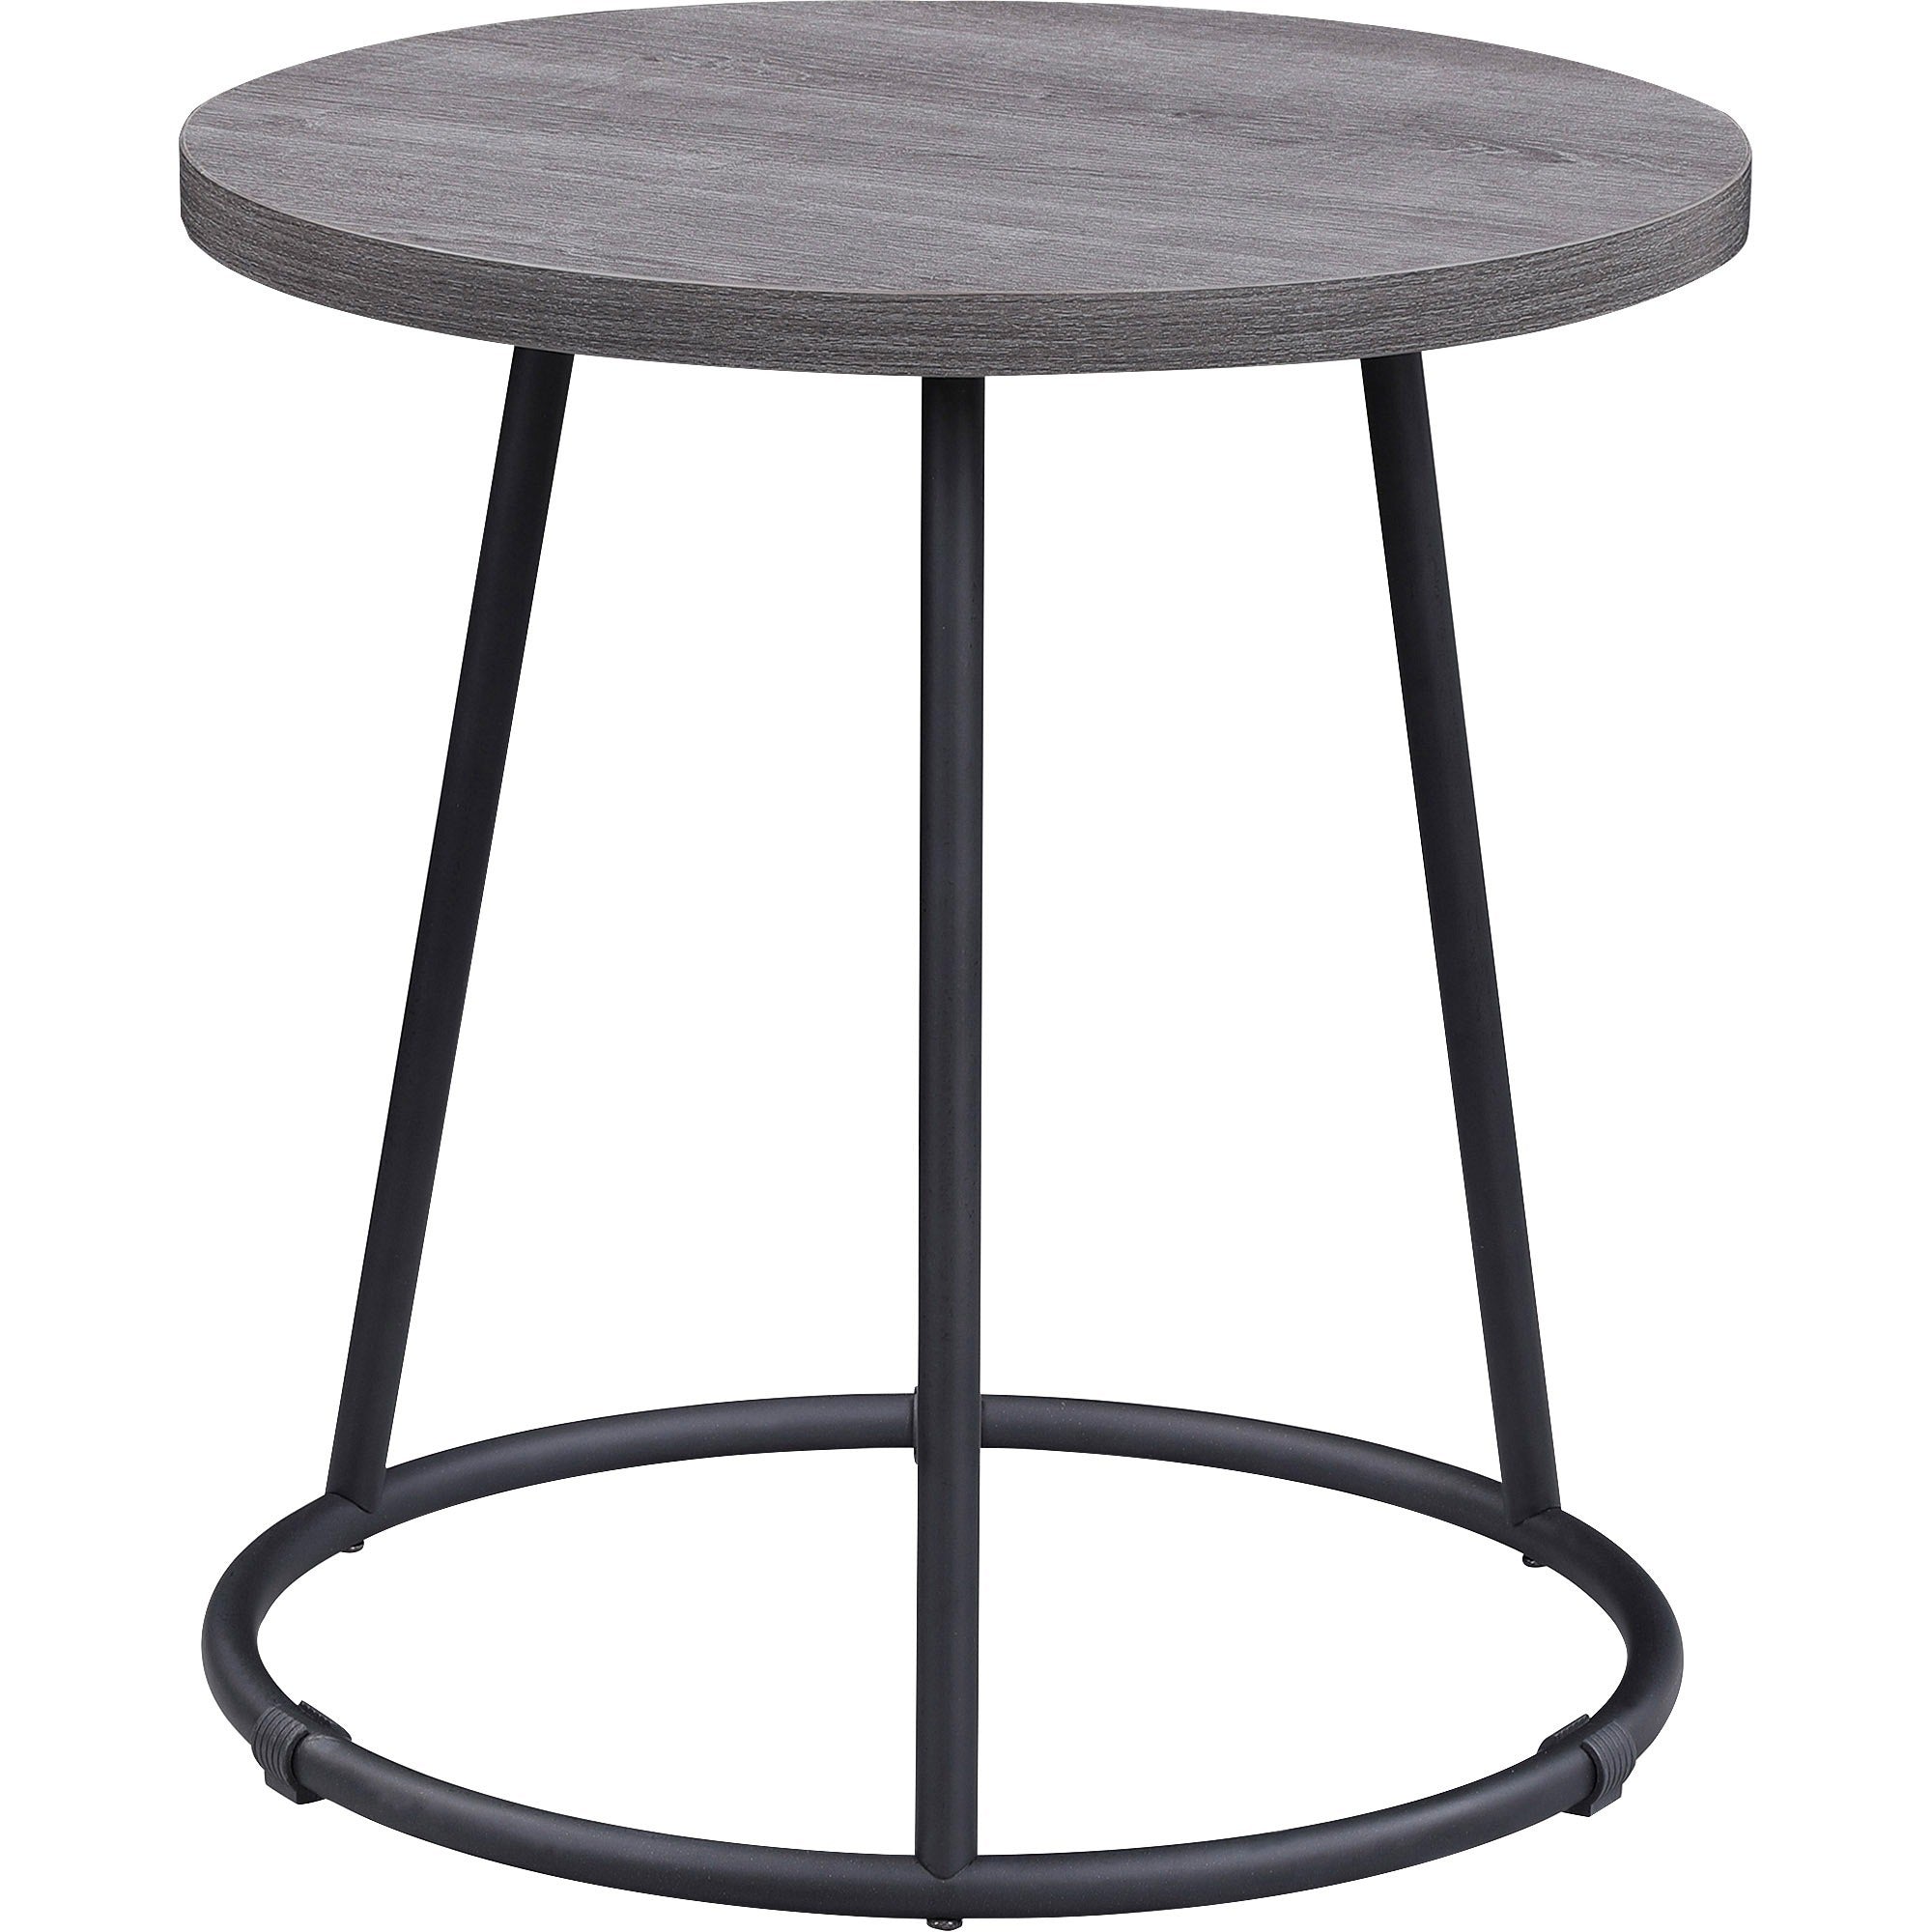 lorell-accession-end-table-for-table-topround-top-powder-coated-four-leg-base-4-legs-200-lb-capacity-x-1-table-top-thickness-x-19-table-top-diameter-1975-height-assembly-required-weathered-charcoal-1-each_llr16262 - 1